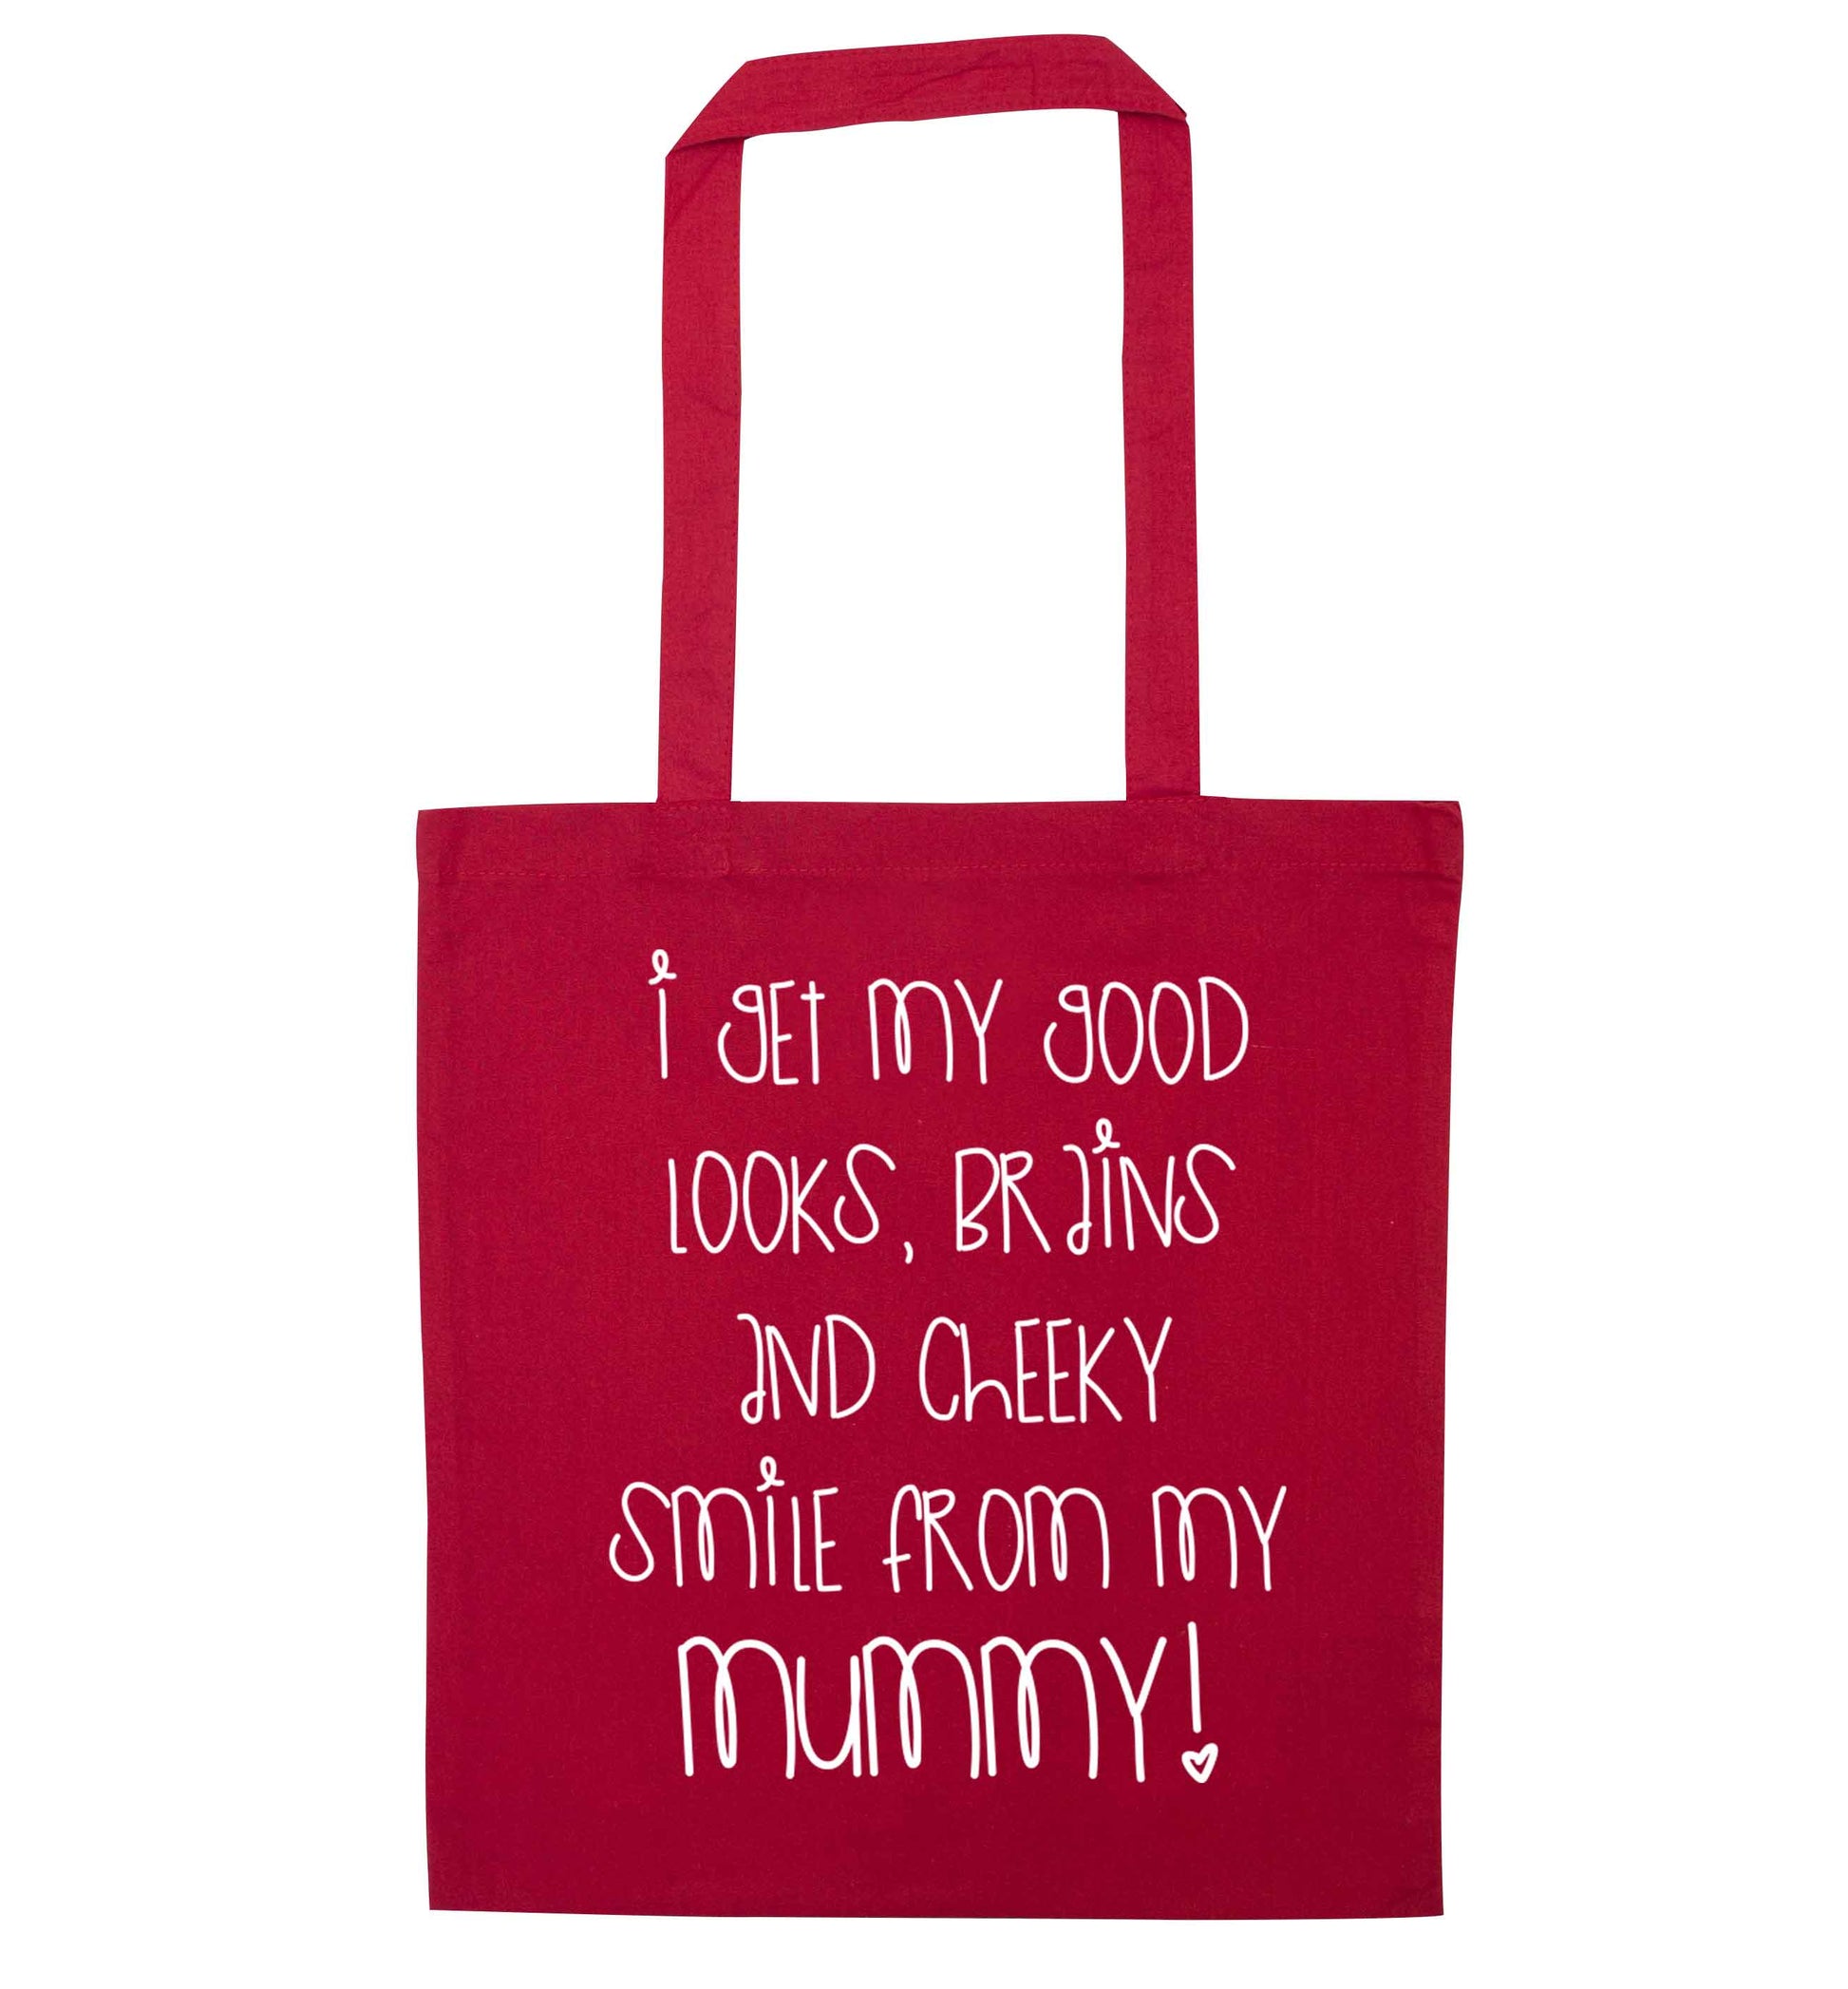 I get my good looks, brains and cheeky smile from my mummy red tote bag